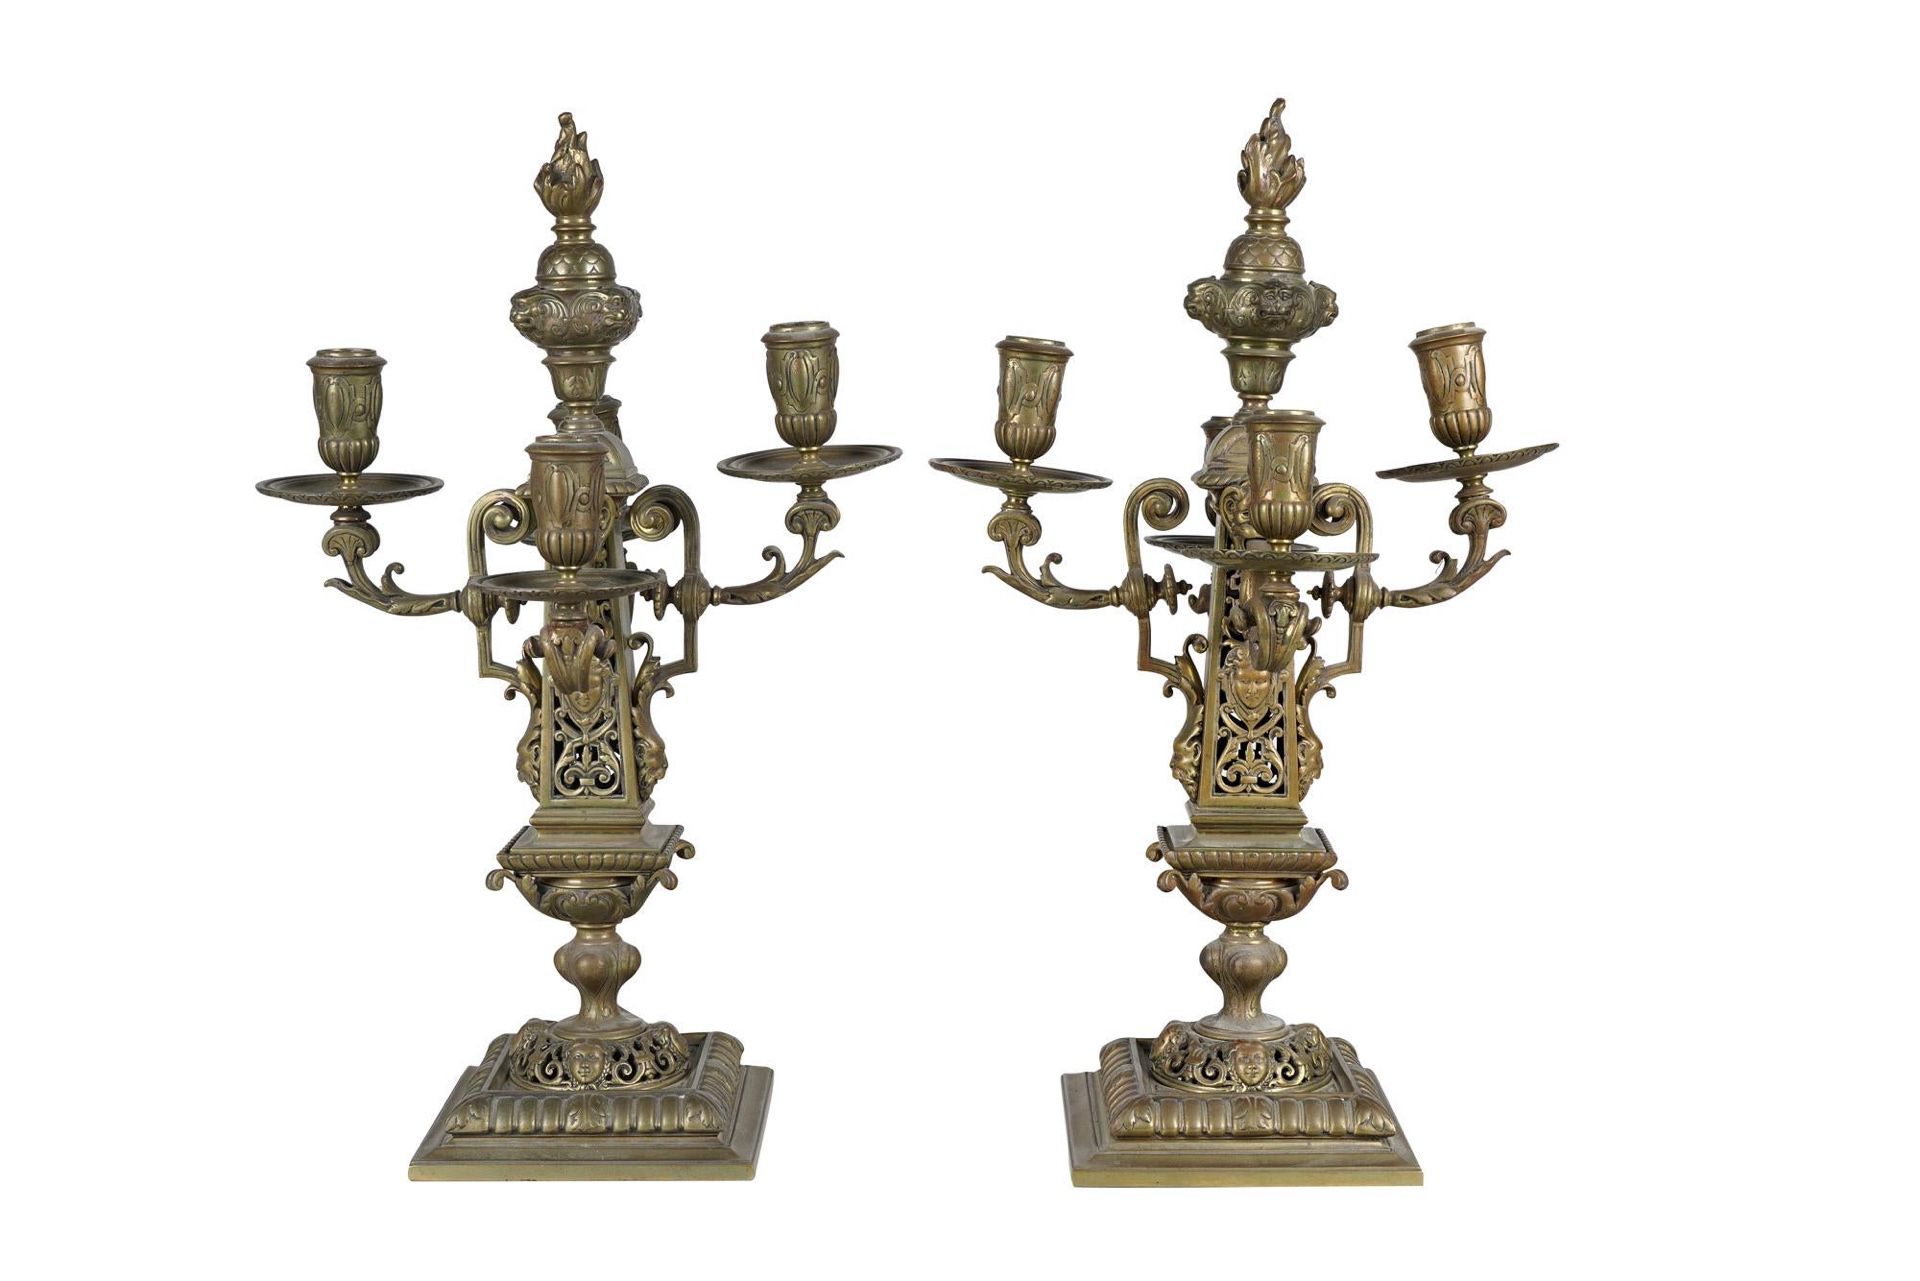 Pair of French Renaissance Revival Brass Candelabra